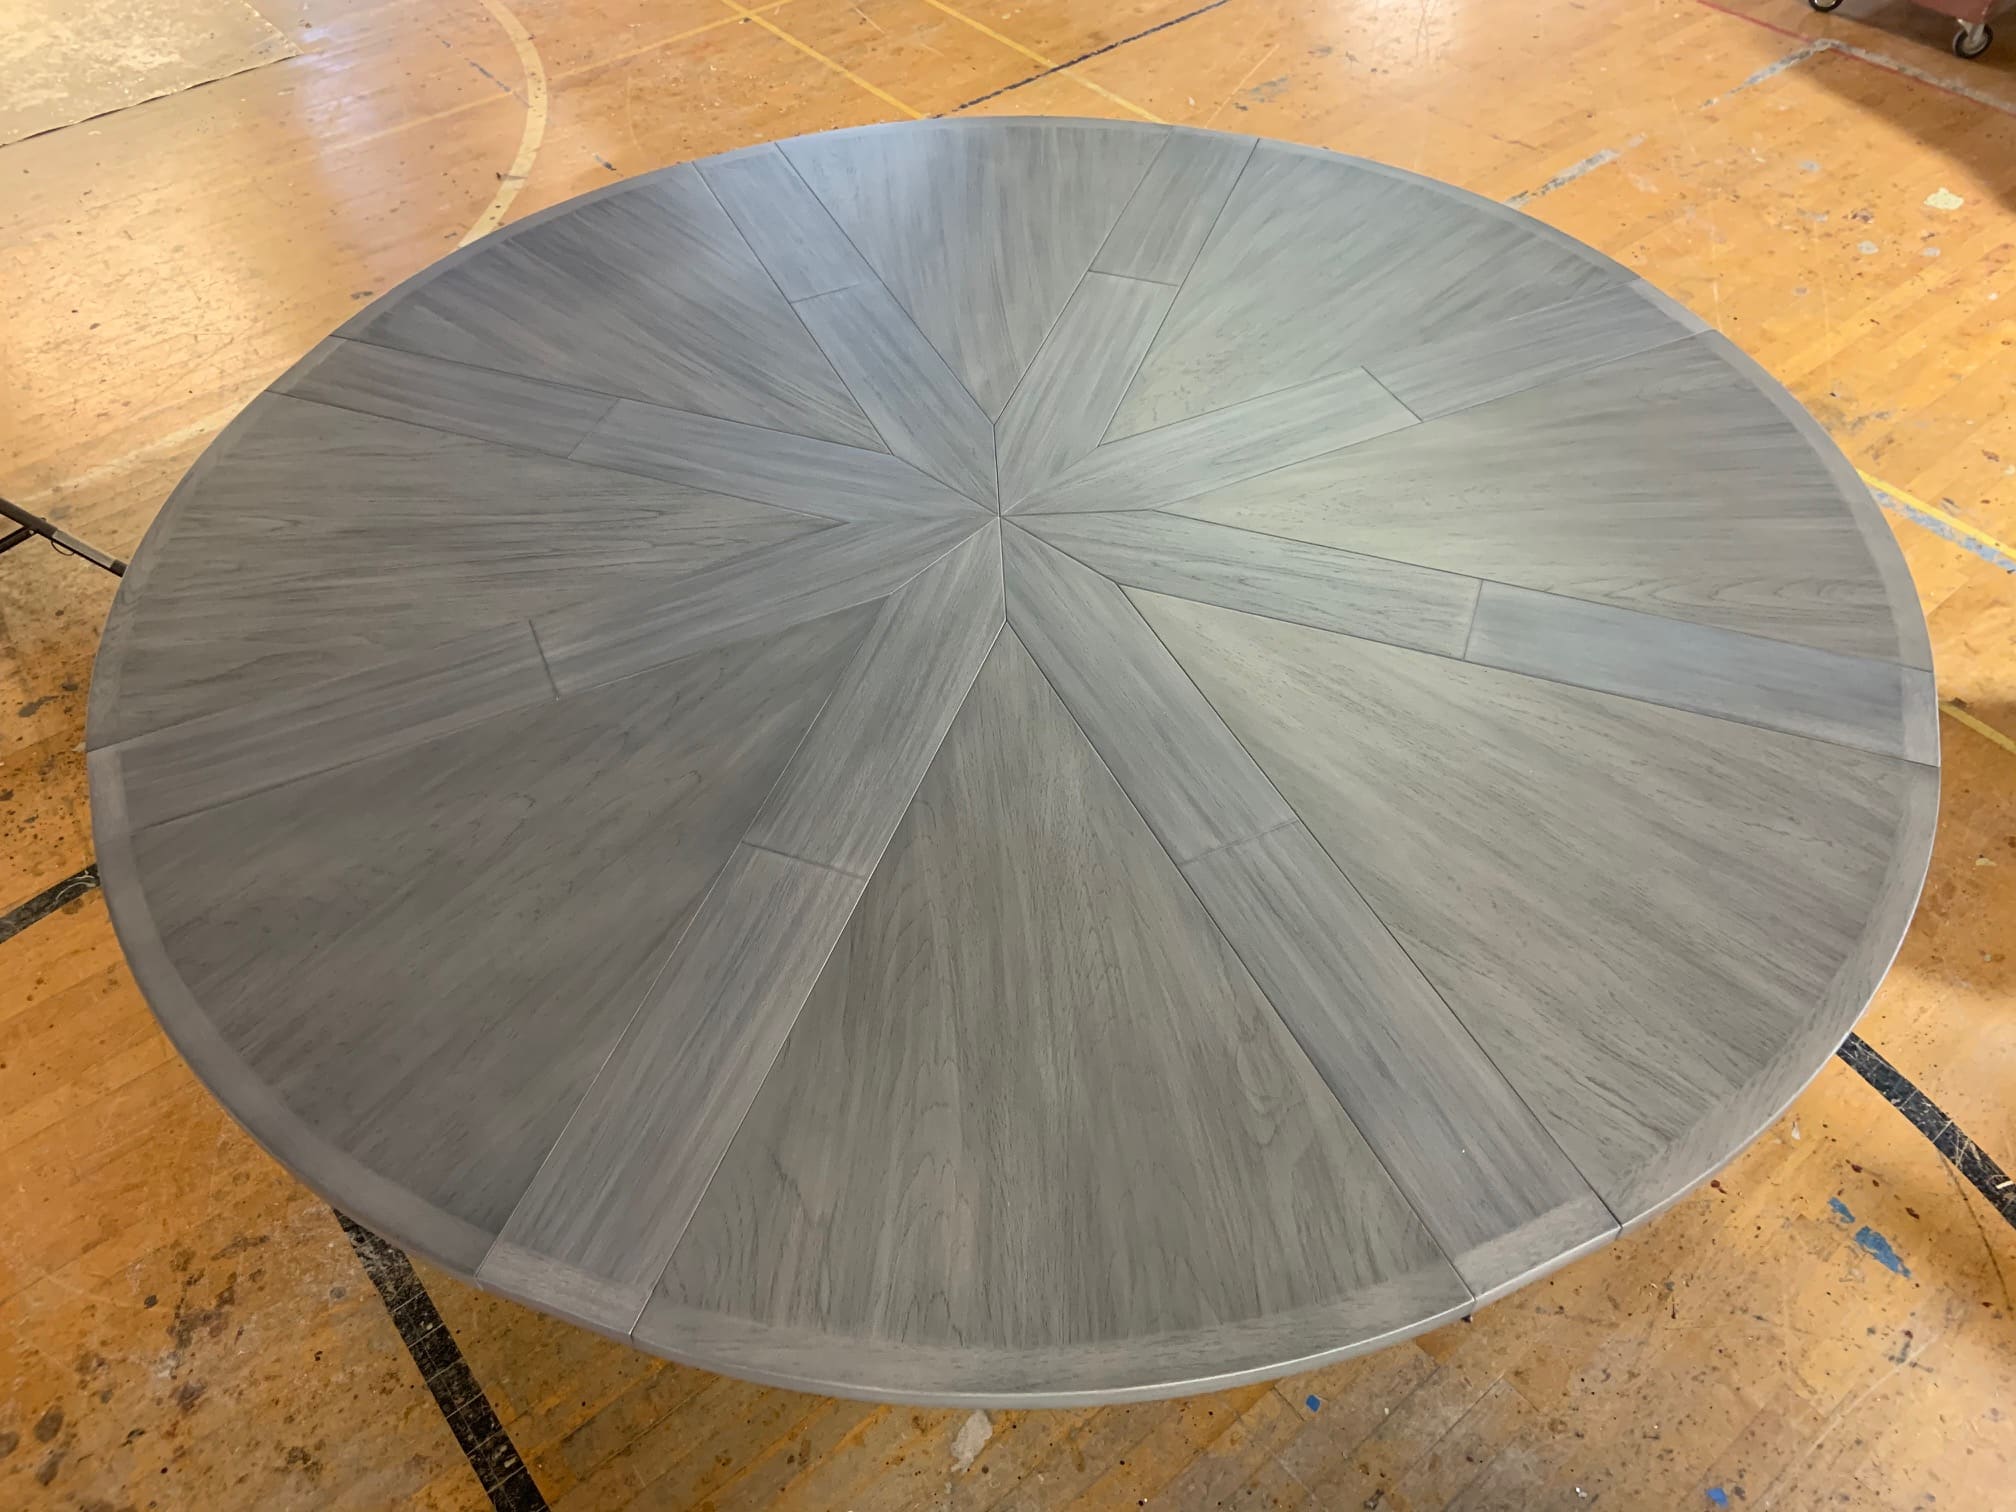 8 Leaf Expanding Round Table Expanded Top View - Burke